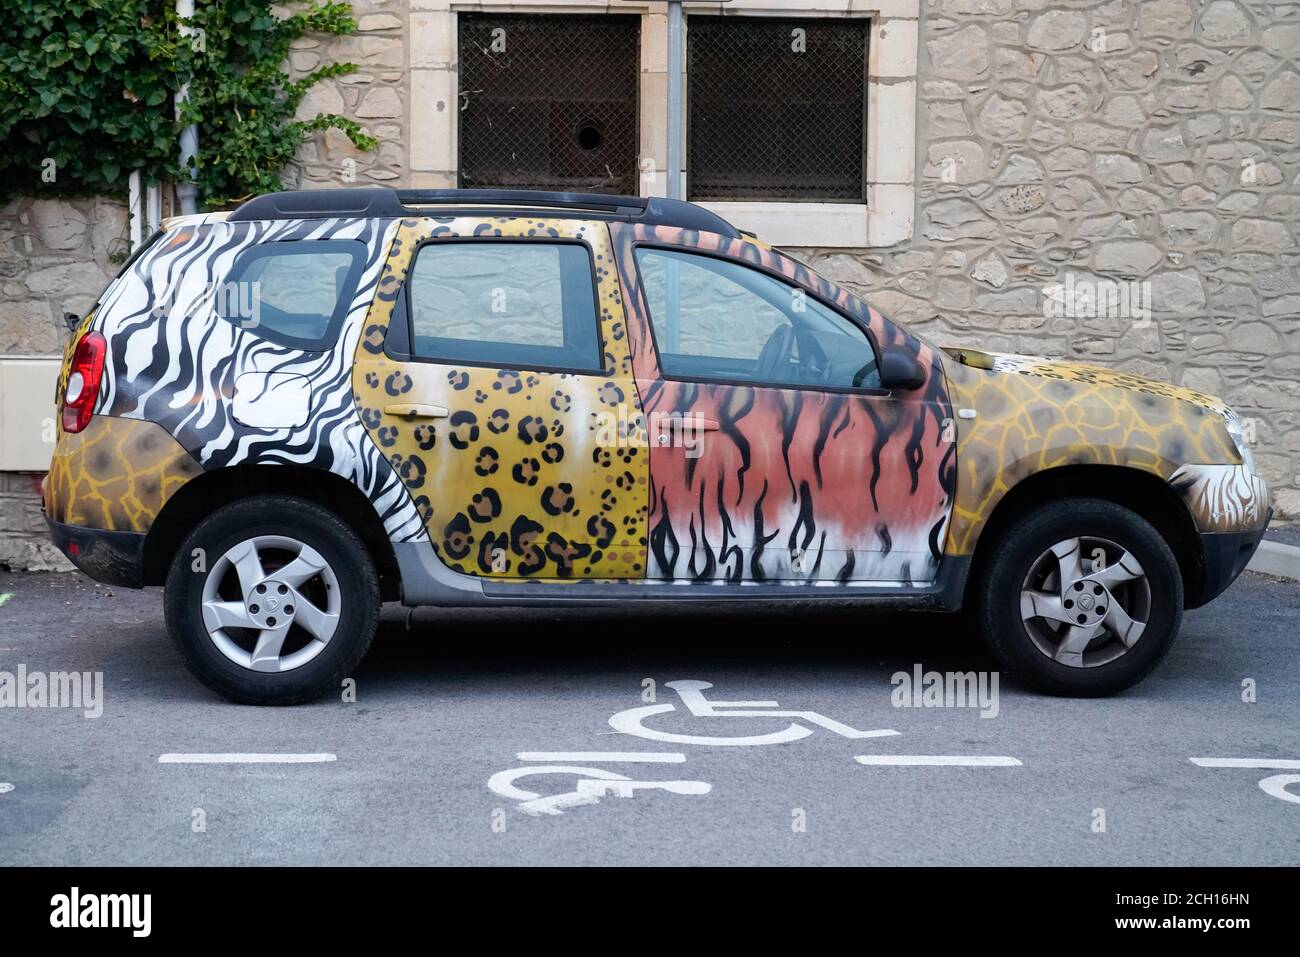 Bordeaux , Aquitaine / France - 09 01 2020 : dacia duster renault suv car with animal paint or stickers covering jungle zebra Stock Photo